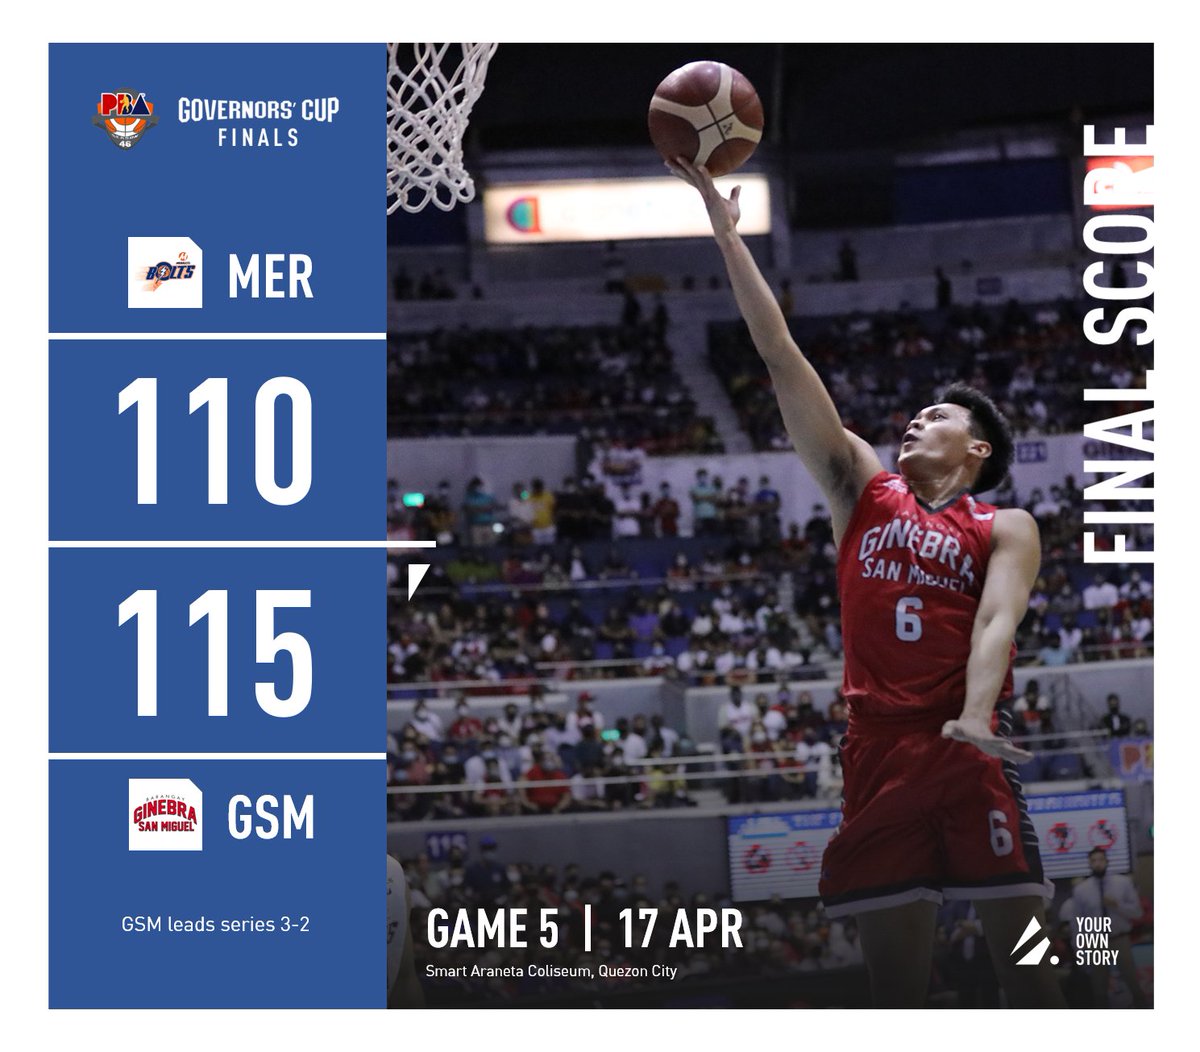 FINAL - In front of a packed Smart Araneta Coliseum, Scottie Thompson conspired into the endgame as Ginebra repels Meralco, 115-110, to push themselves on the cusp of defending its Governors’ Cup title.

MER - 110
GSM - 115
Ginebra leads series 3-2

#PBA   #PBAiTuloyAngLaban